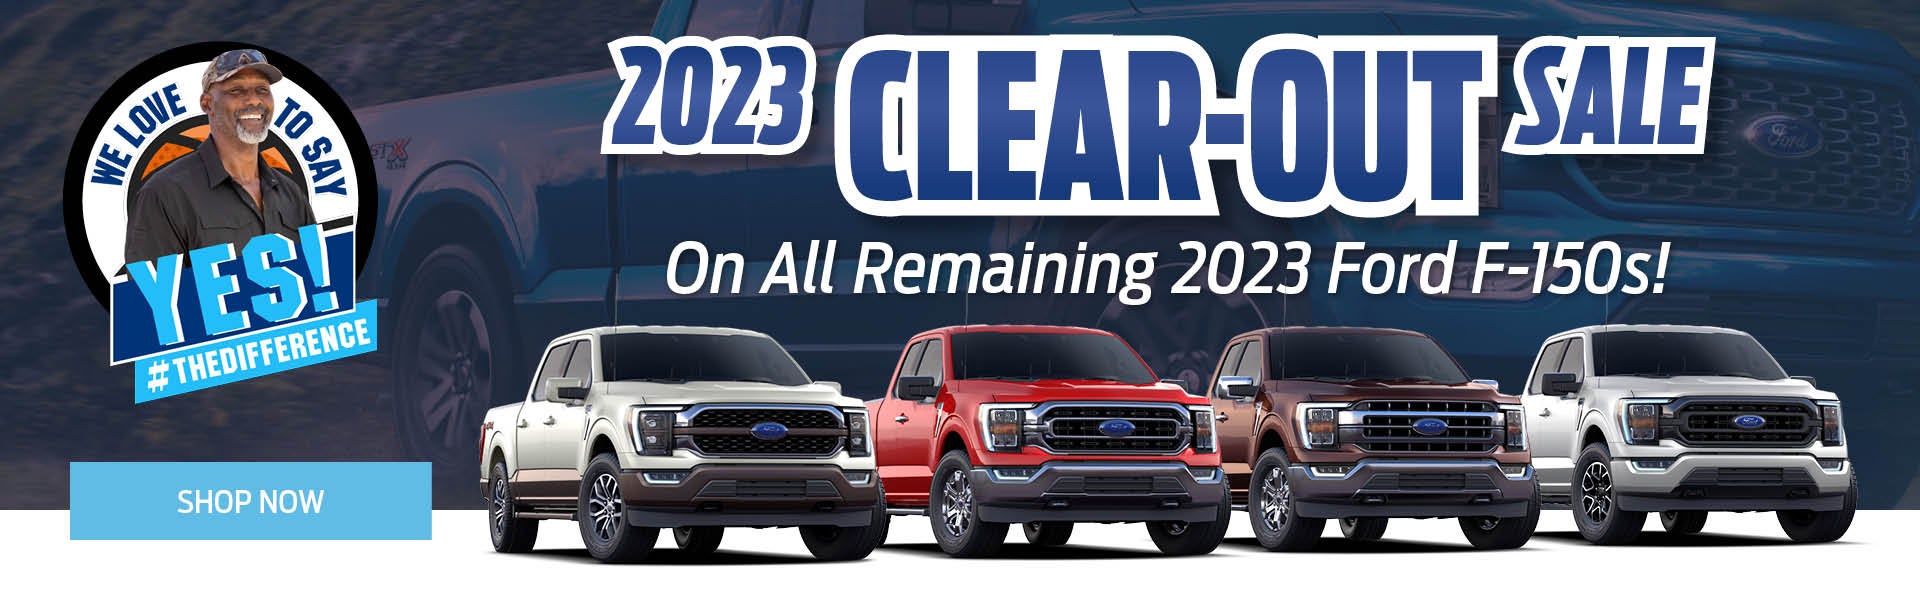 Clearout Sale 2023 F-150s must go